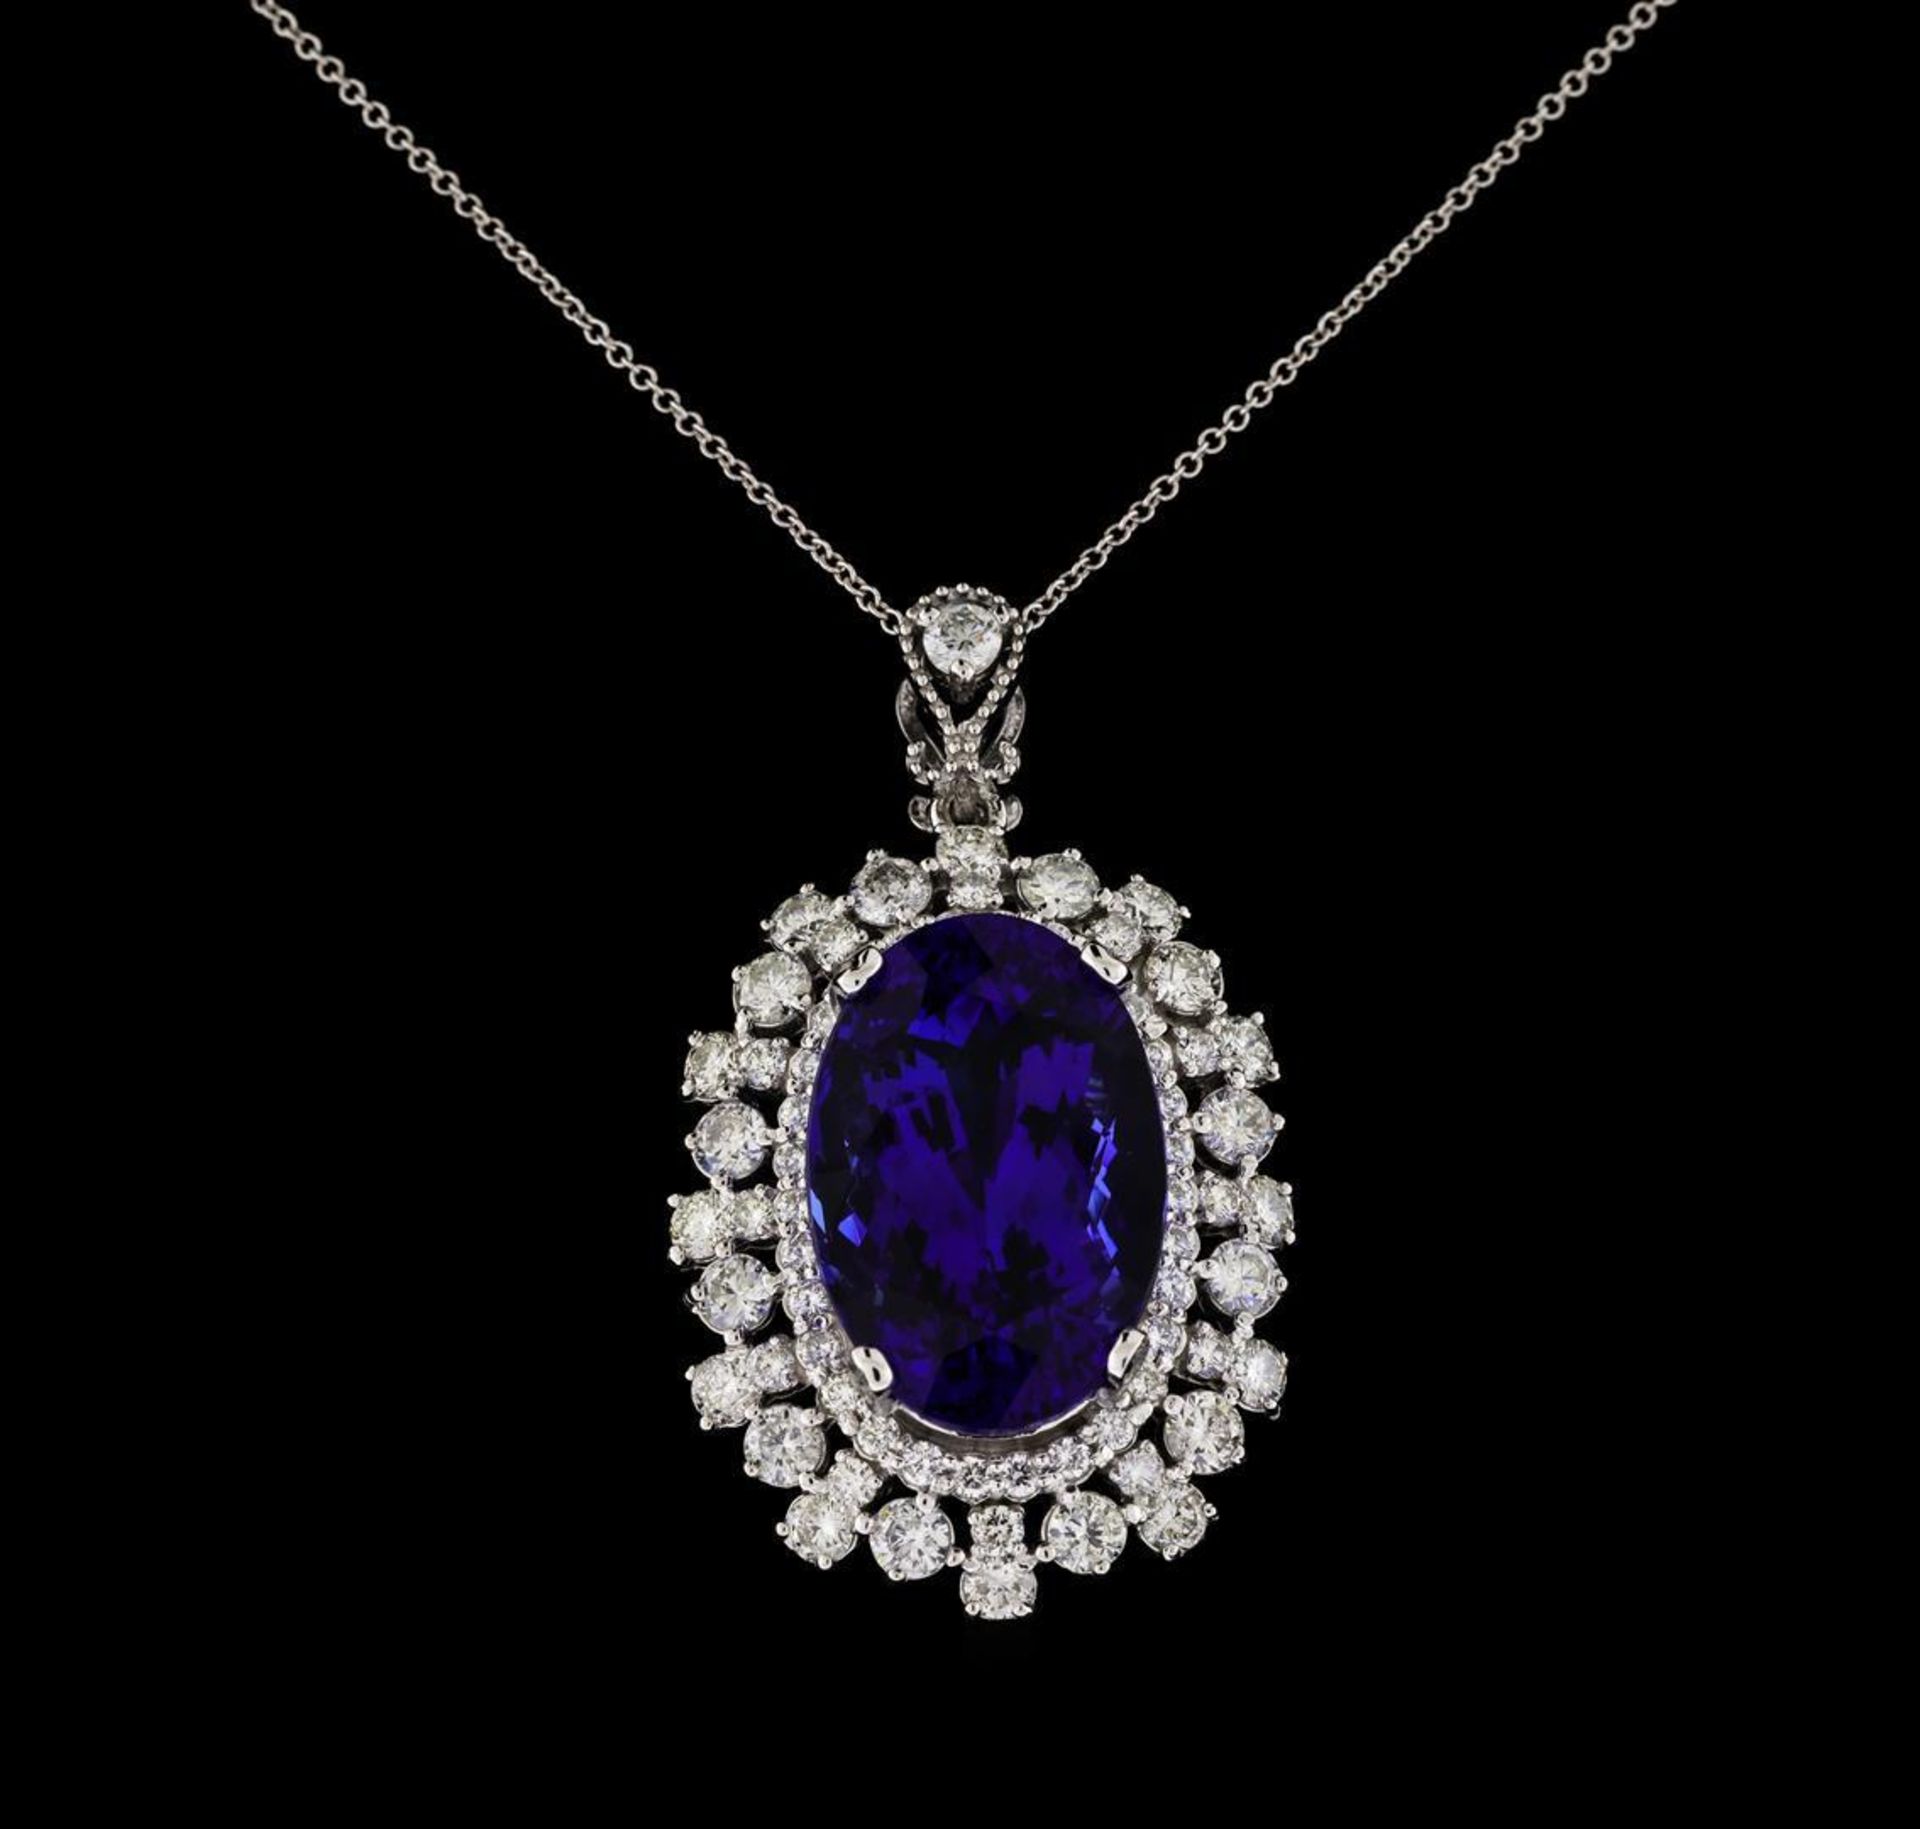 20.96 ctw Tanzanite and Diamond Pendant With Chain - 14KT White Gold - Image 2 of 4